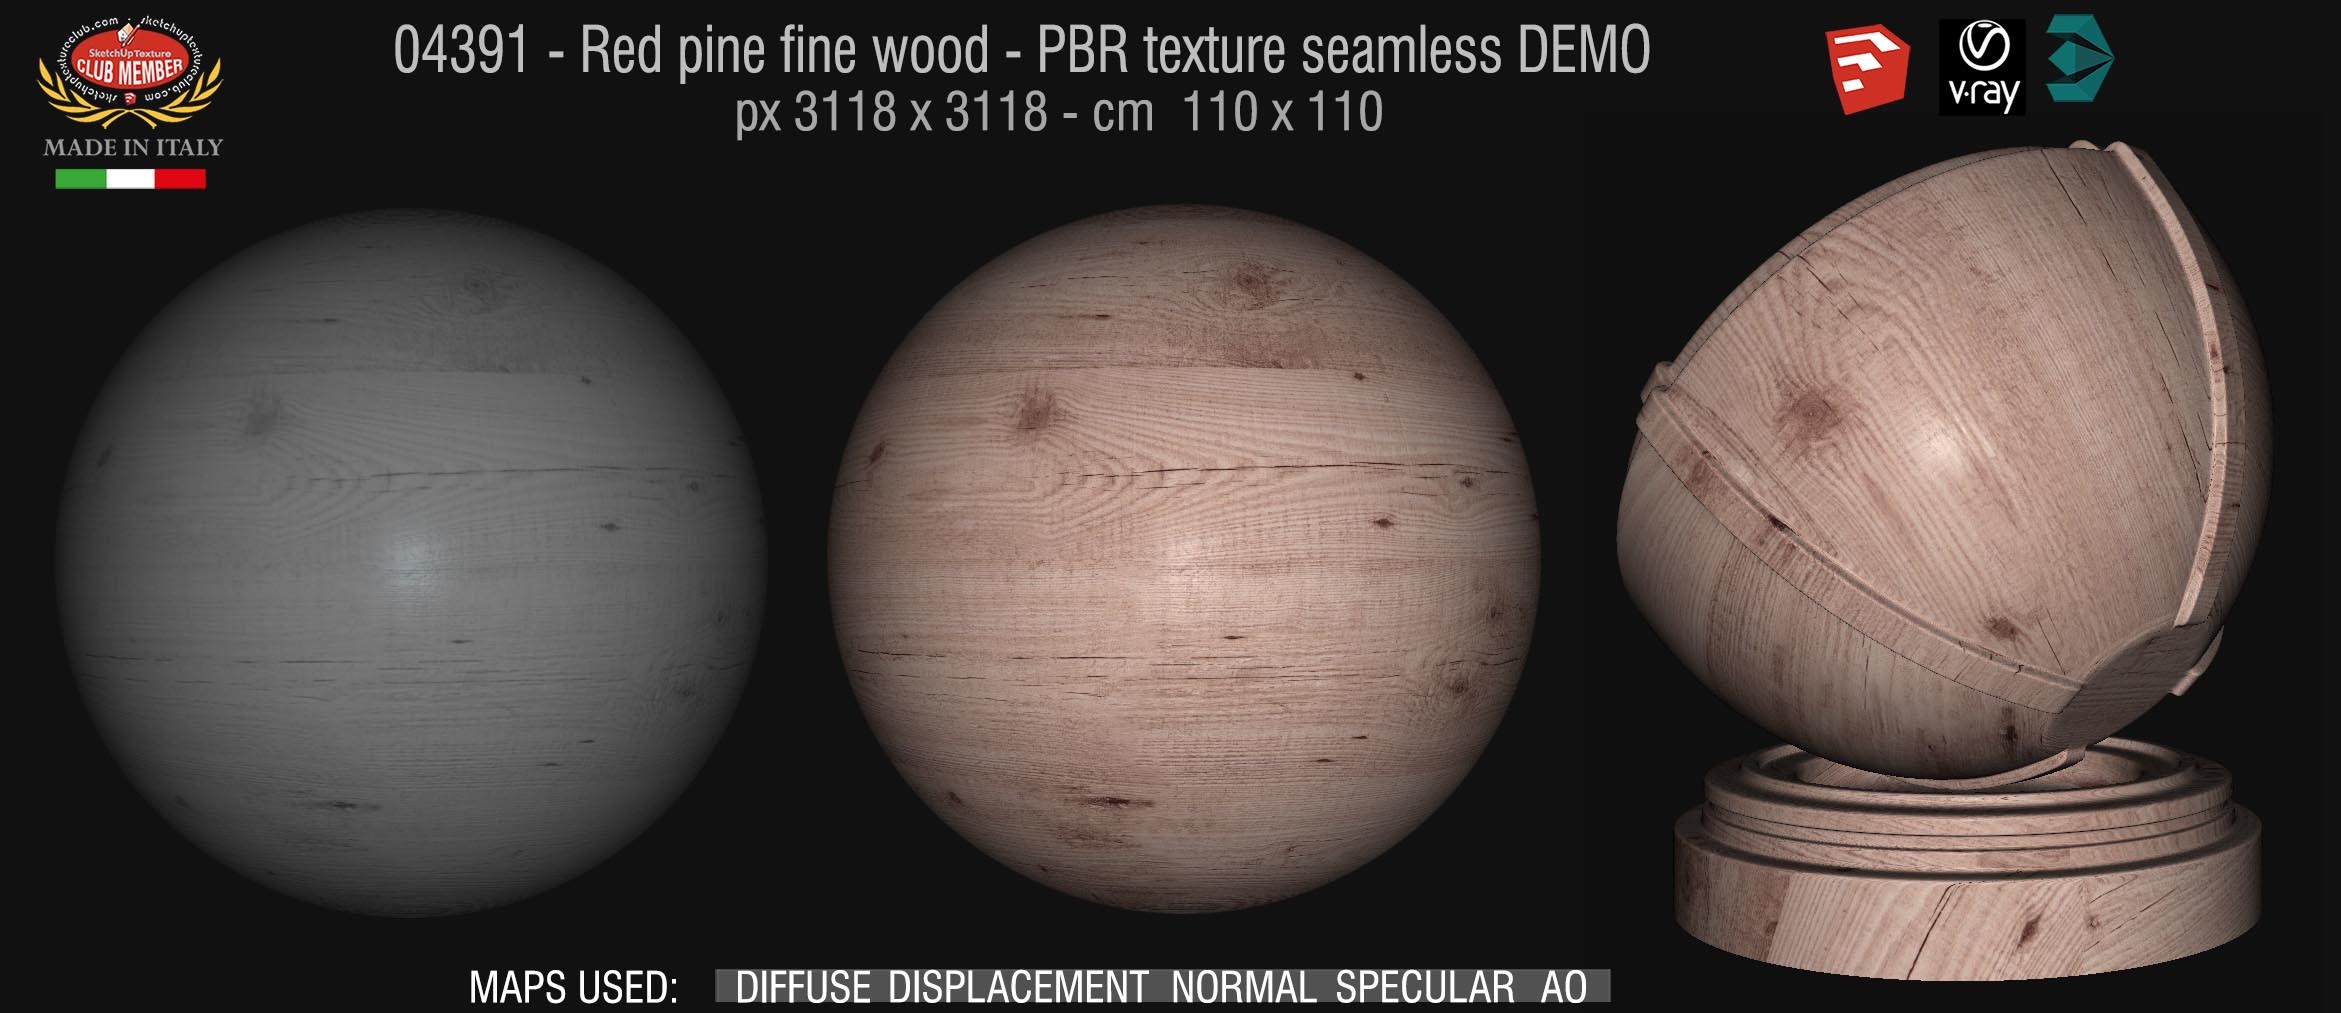 04391 Red pine fine wood texture seamless DEMO